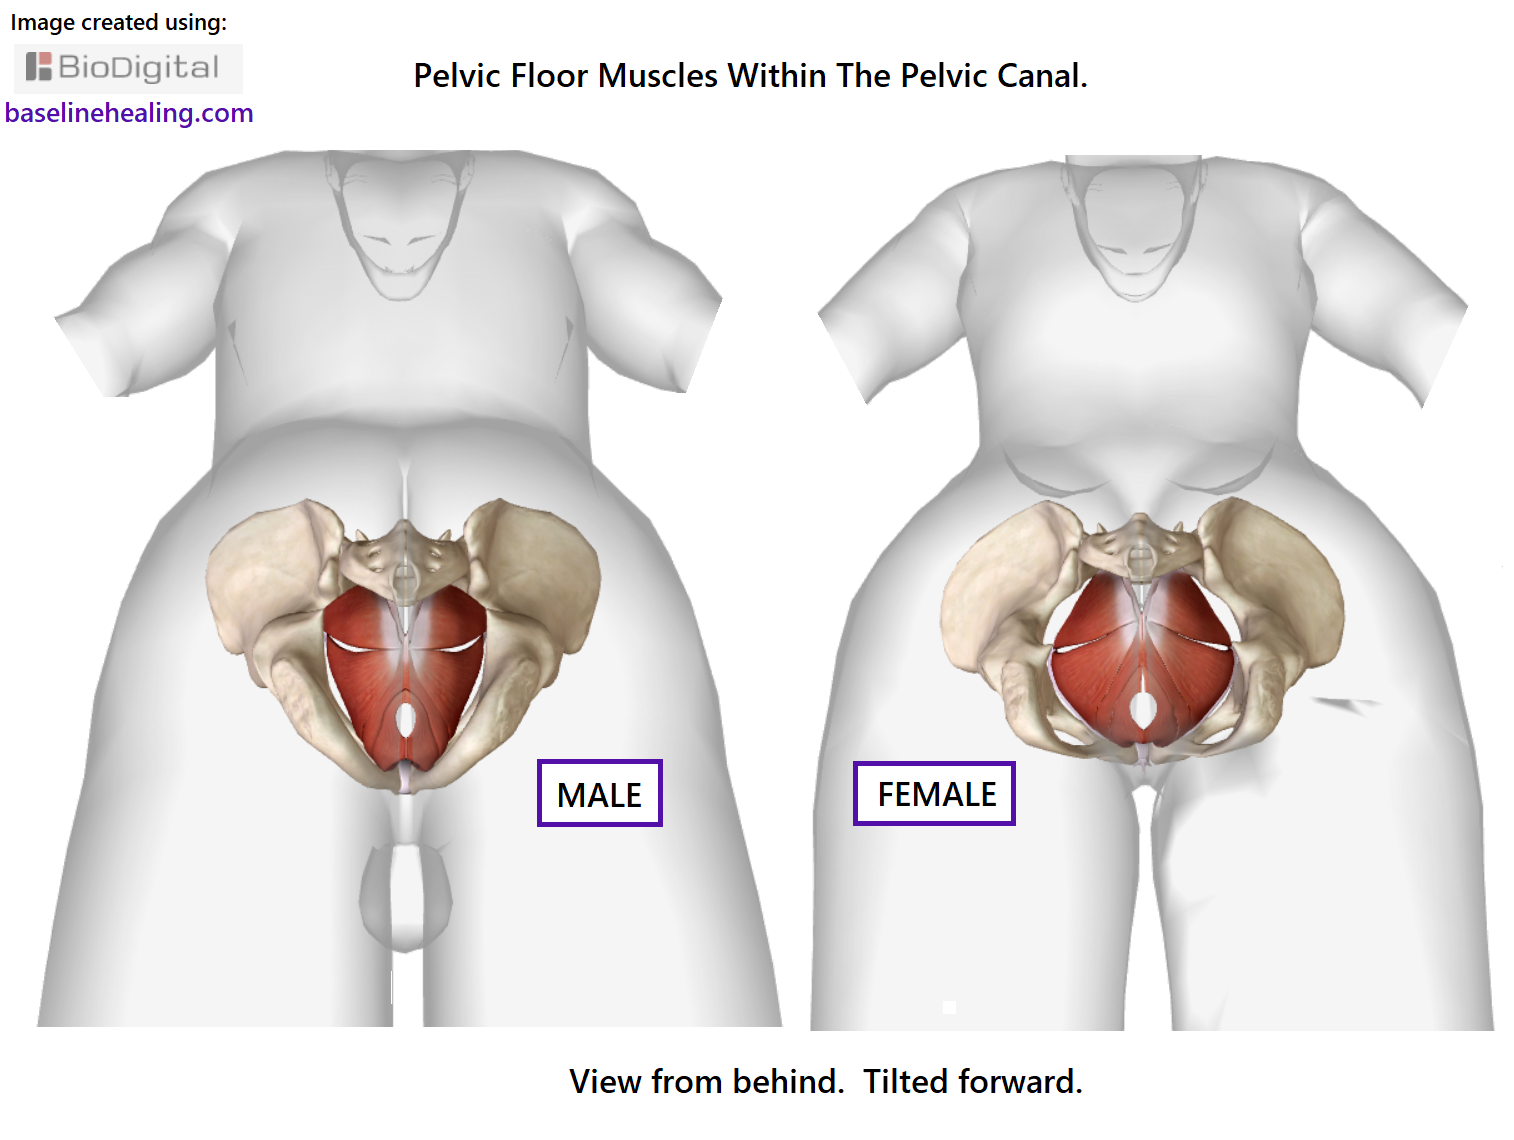 male and female body outline seen from behind tilted forwards a little to show the pelvis and pelvic floor muscles within the pelvic canal. The female pelvis and pelvic floor muscles are a round shape when seen from this view.  The male pelvis and pelvic floor muscles more of a triangle, with the base point at the front of the pelvis where the pubic symphysis is located.